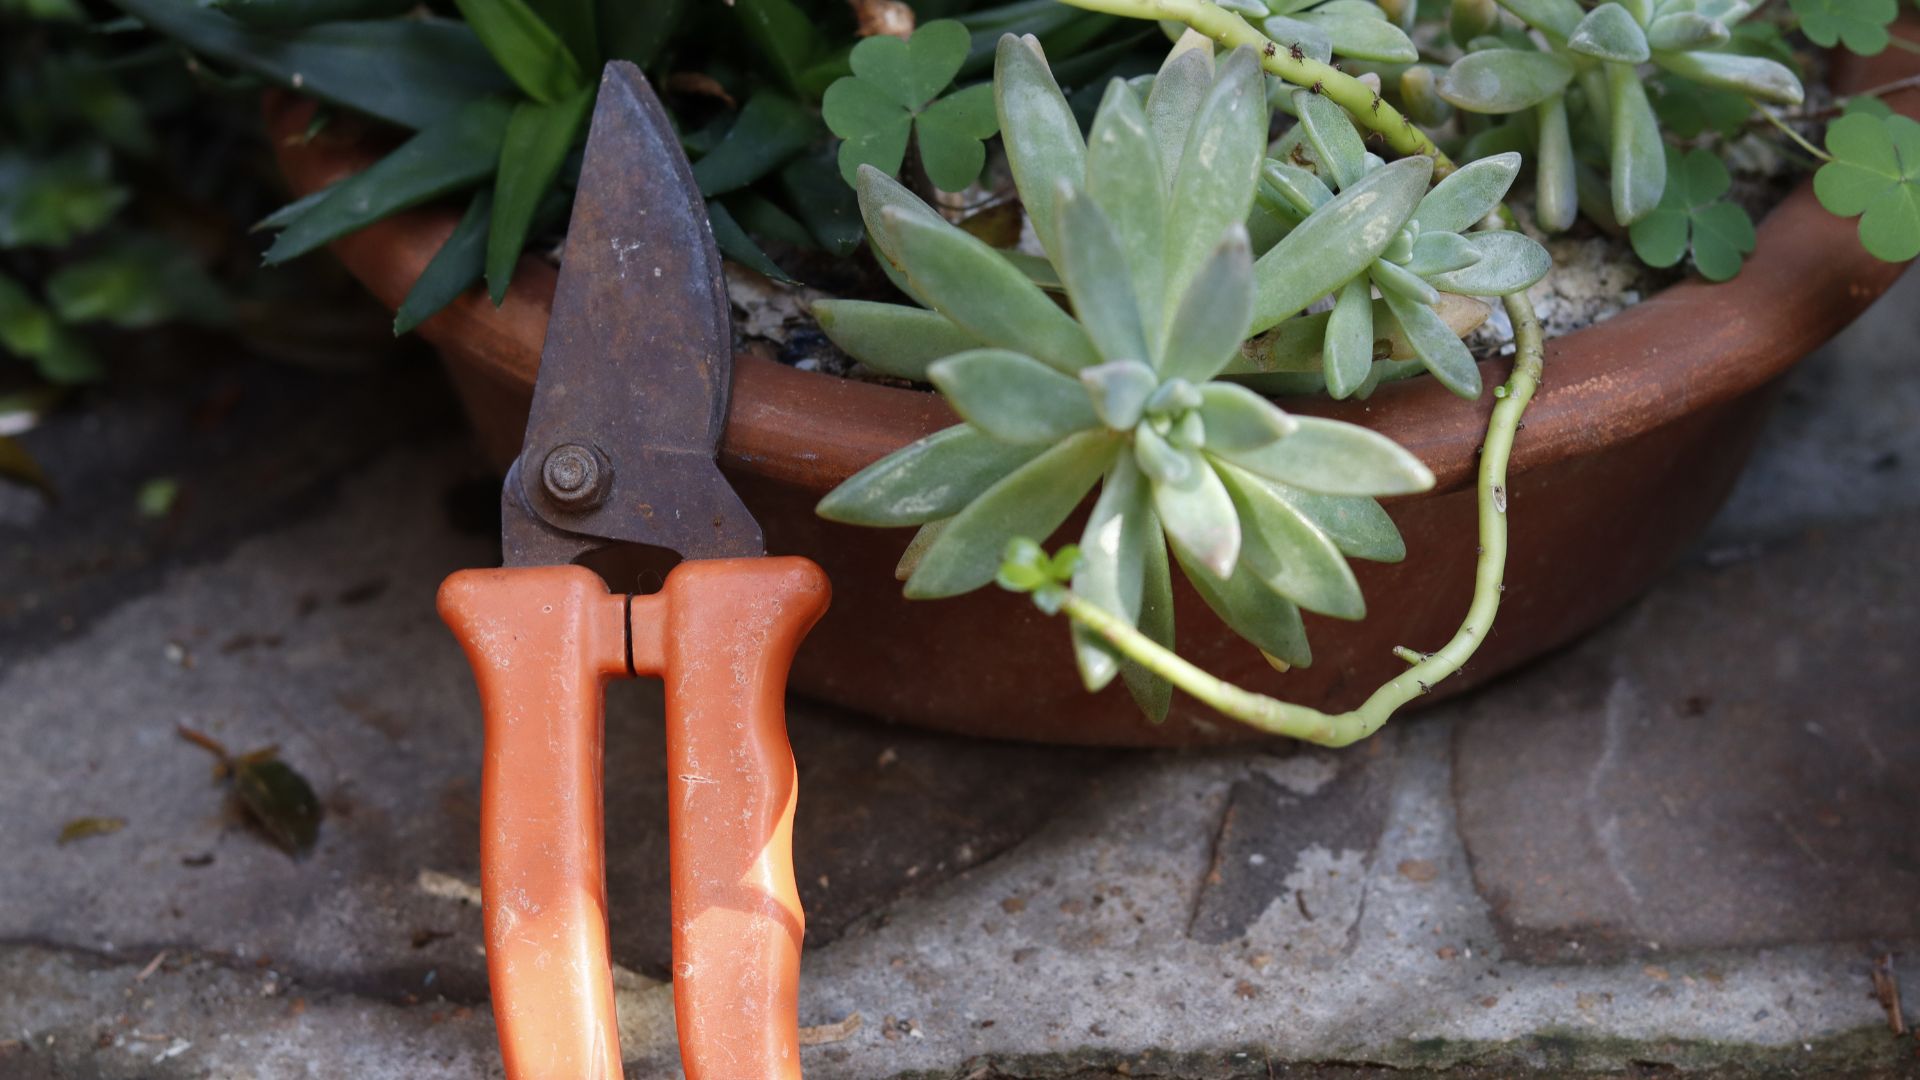 picture of gardening shears next to a plant pot